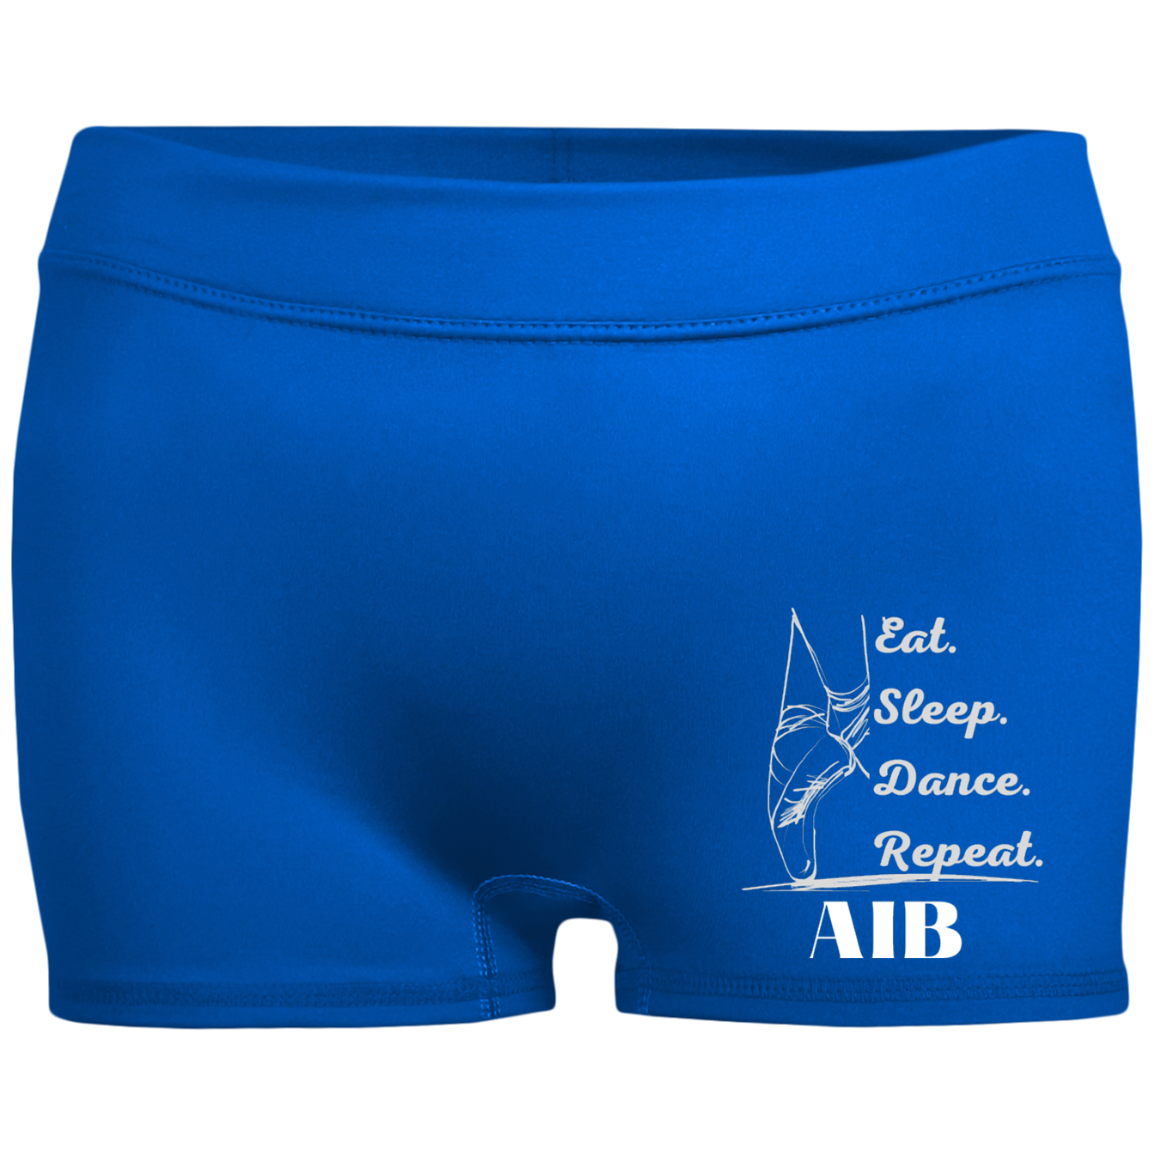 Eat. Sleep. Dance. Repeat. AIB- Ladies' Fitted Moisture-Wicking 2.5 inch Inseam Shorts